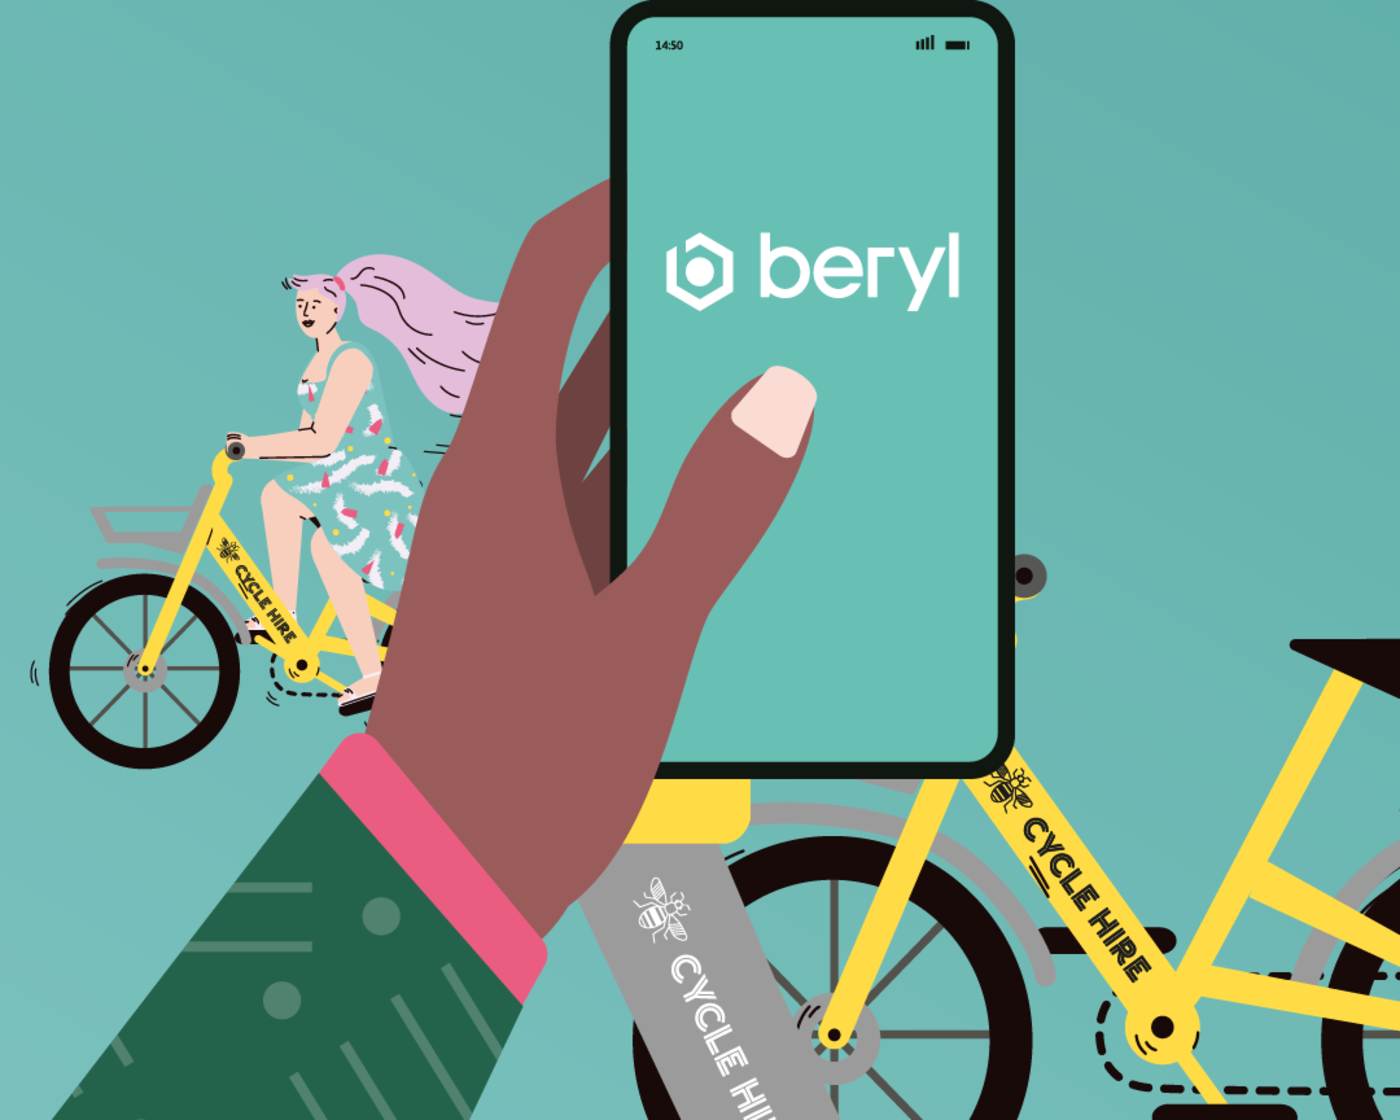 A graphic showing a phone with the Beryl logo, and cycle hire bikes placed behind